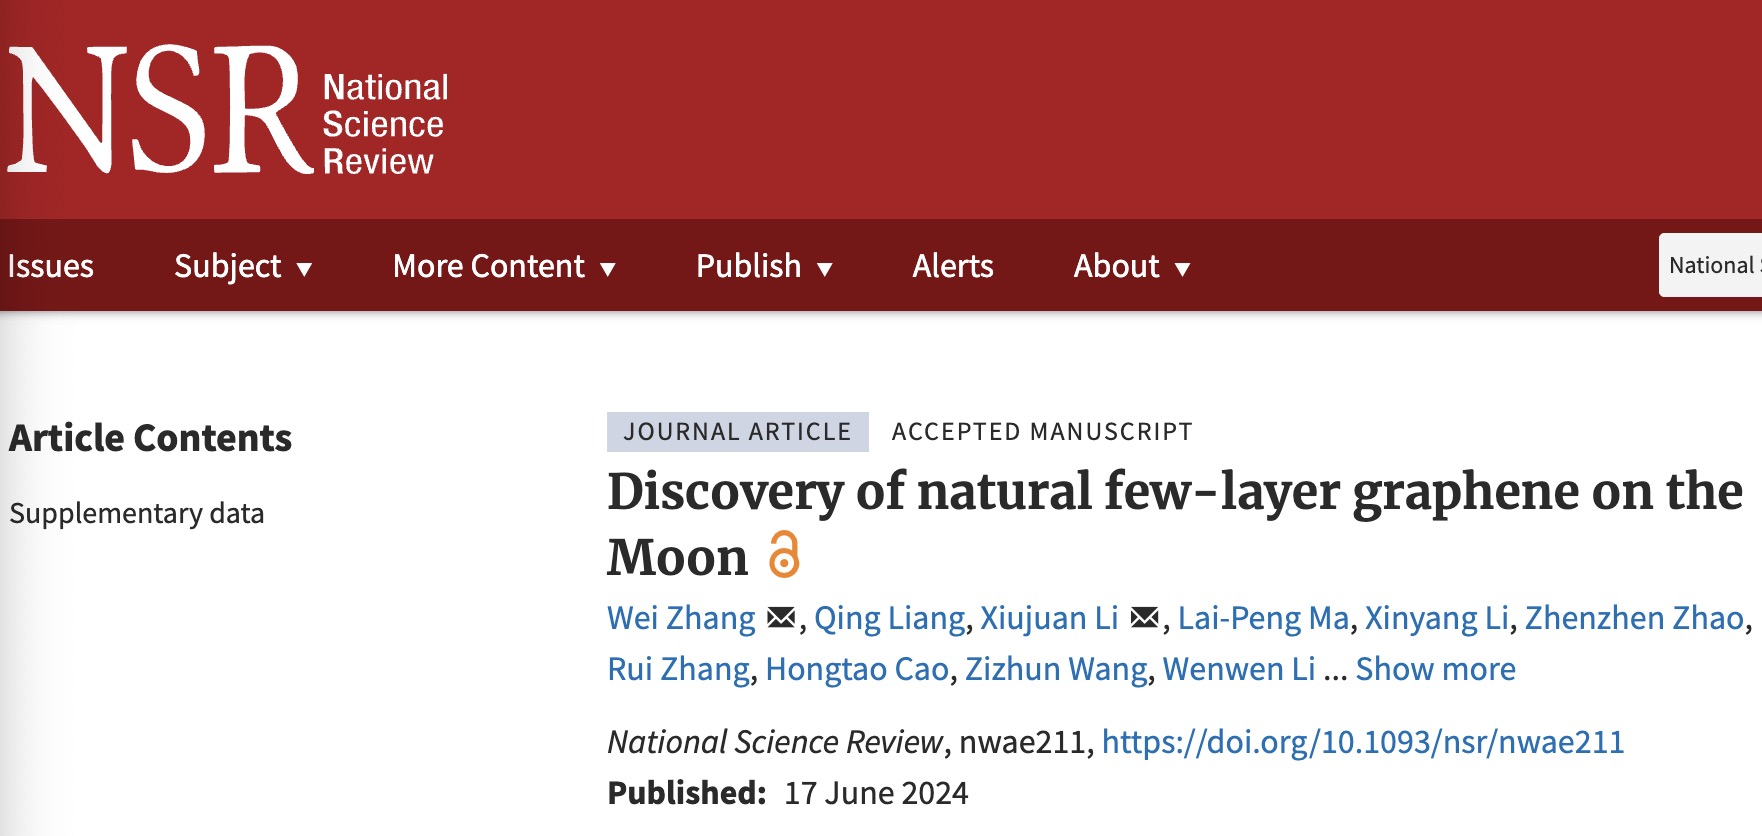 A screenshot of the study published in the journal National Science Review, June 17, 2024. 